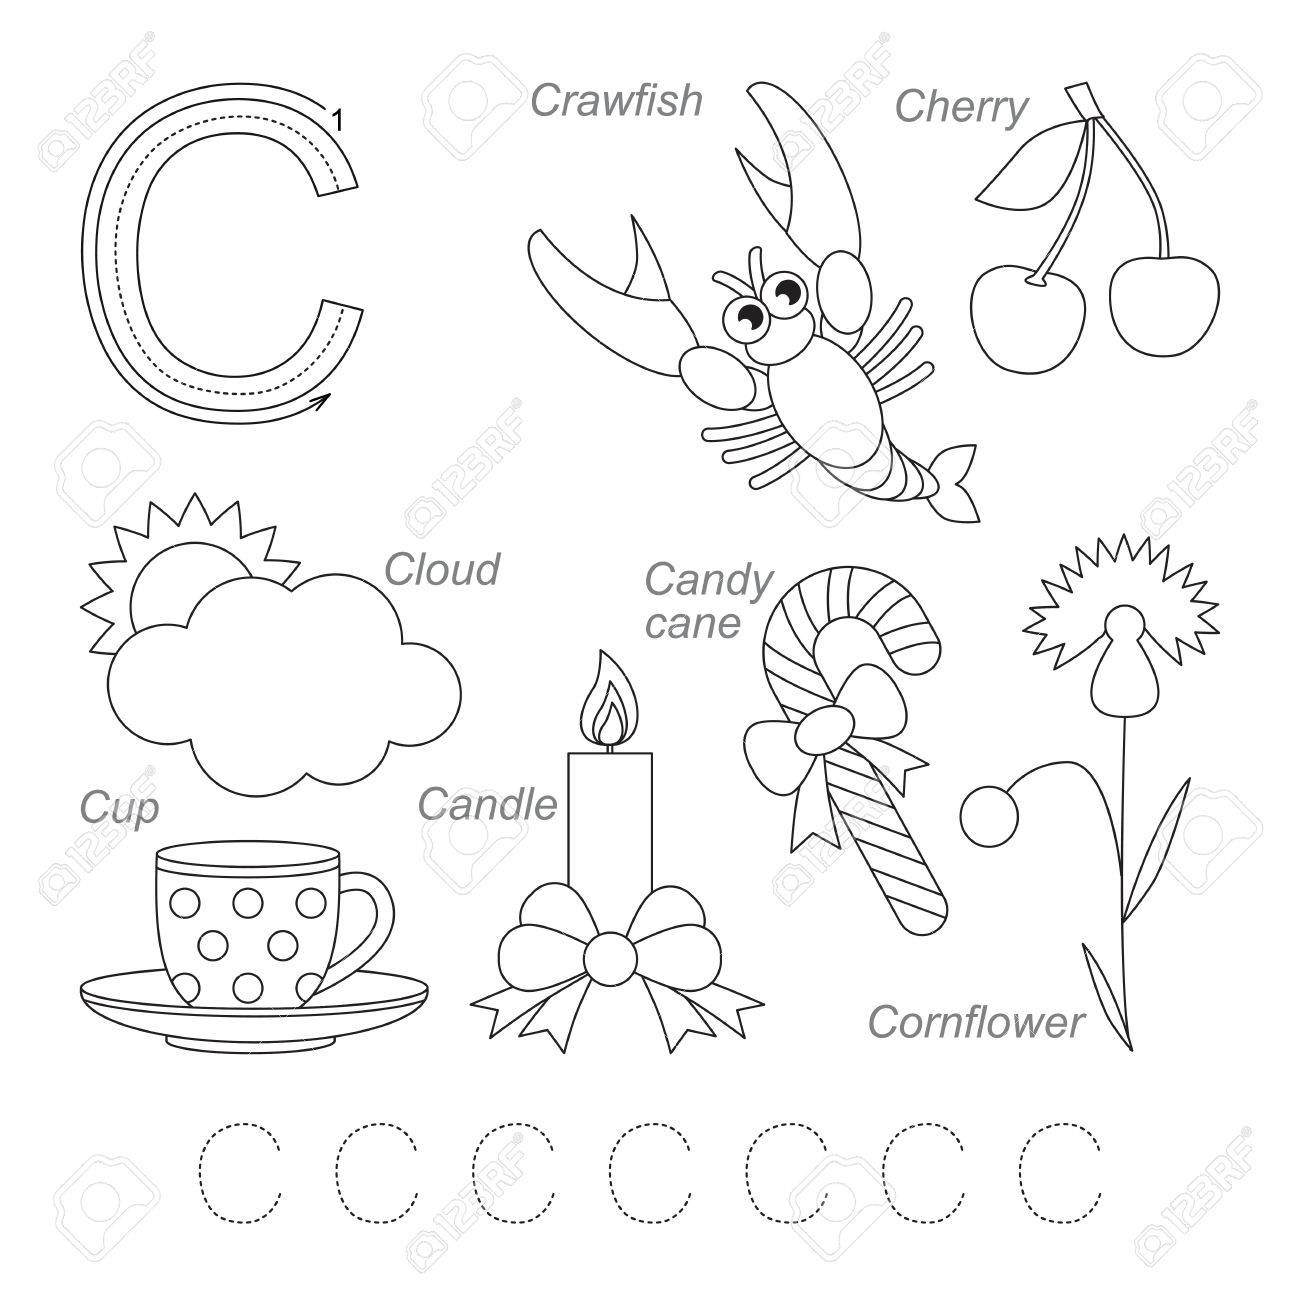 Tracing Worksheet For Children. Full English Alphabet From A.. throughout Letter C Worksheets Free